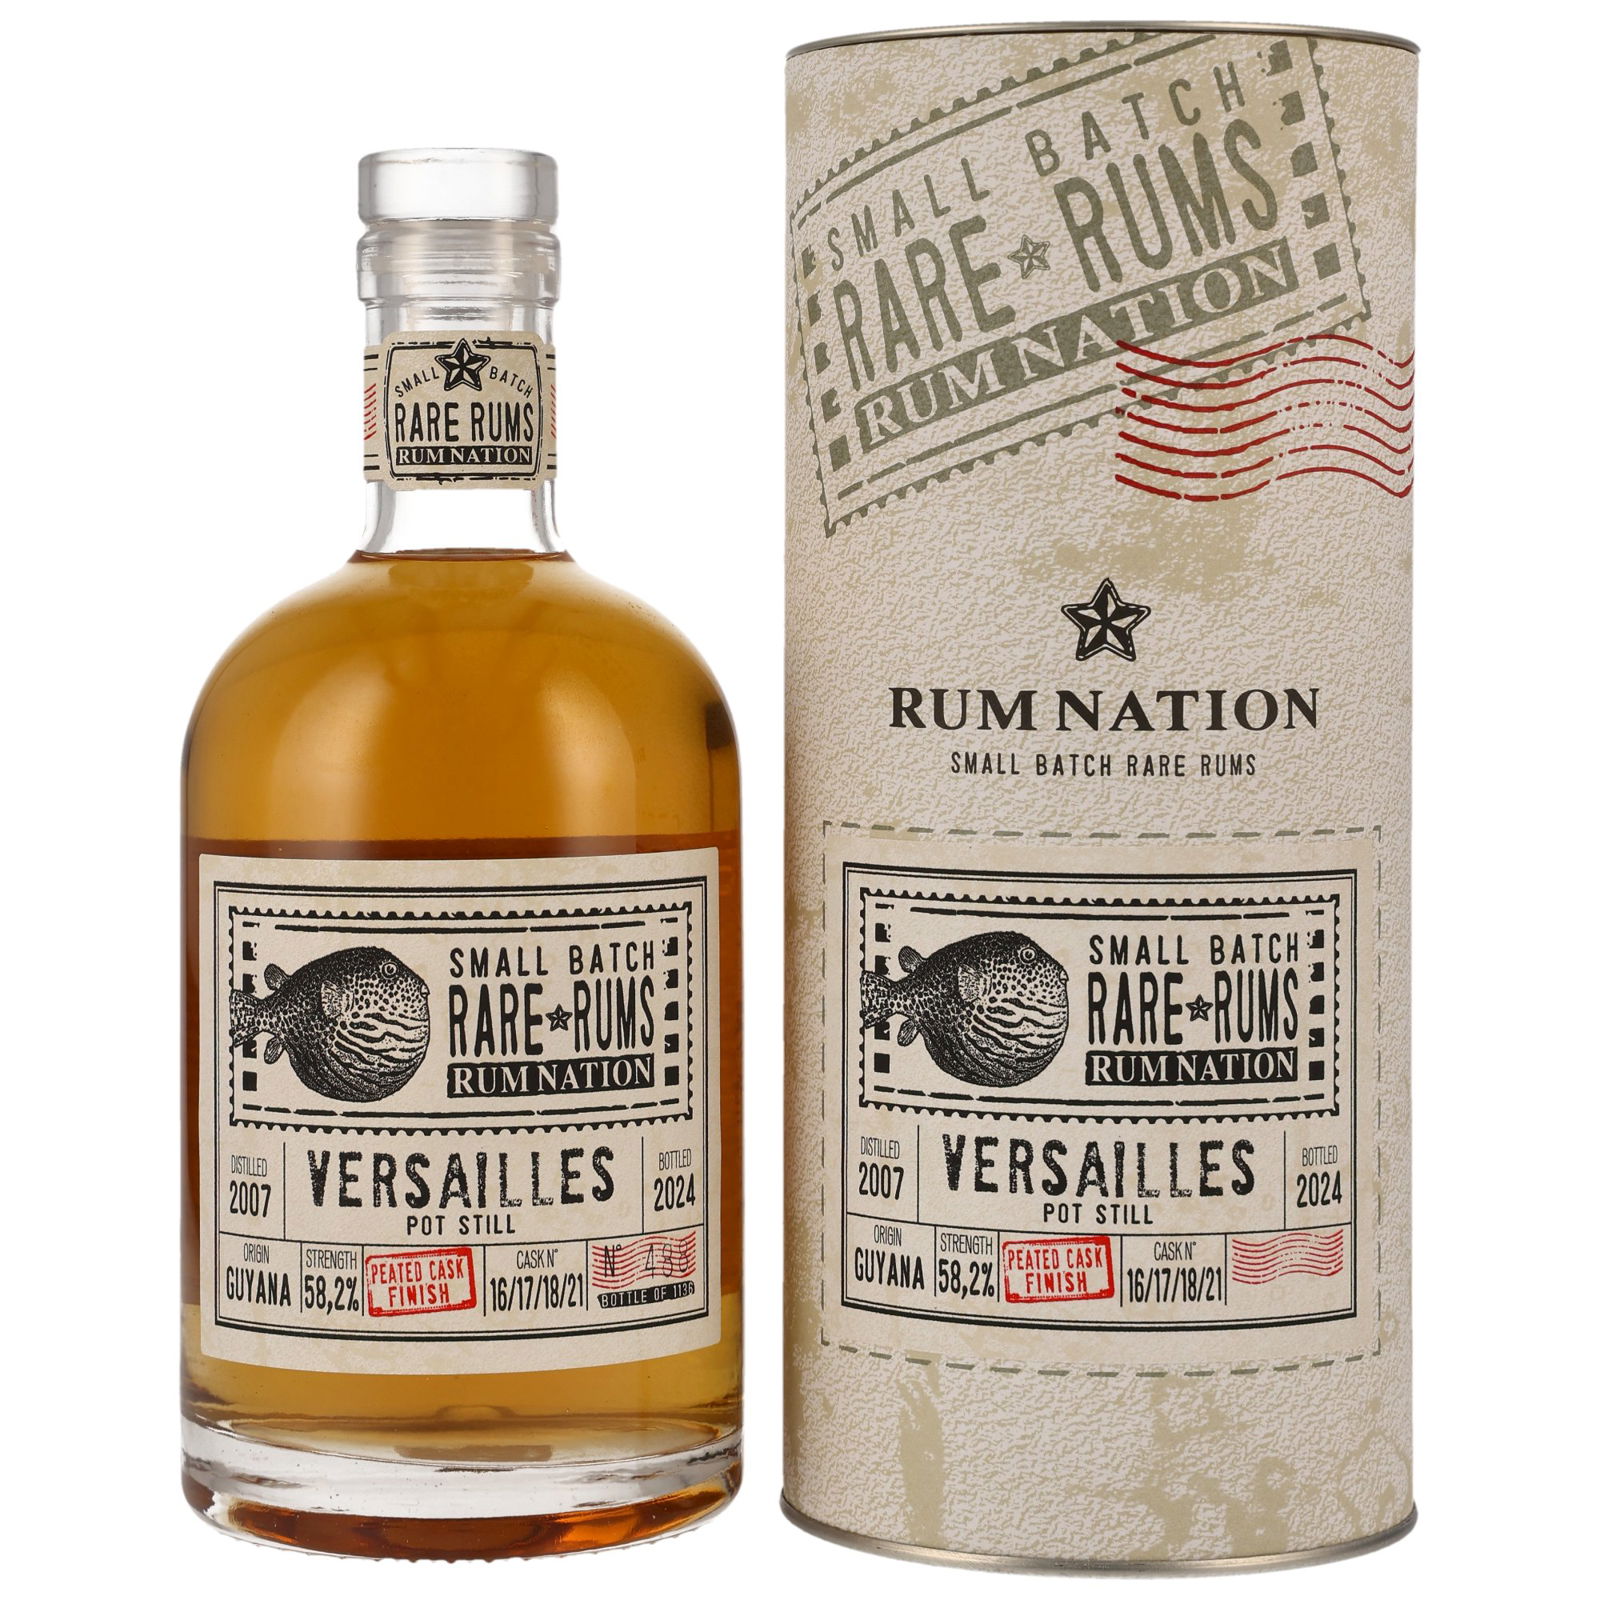 Versailles 2007/2024 - 16 Jahre Peated Whisky Cask Finish (Rum Nation)